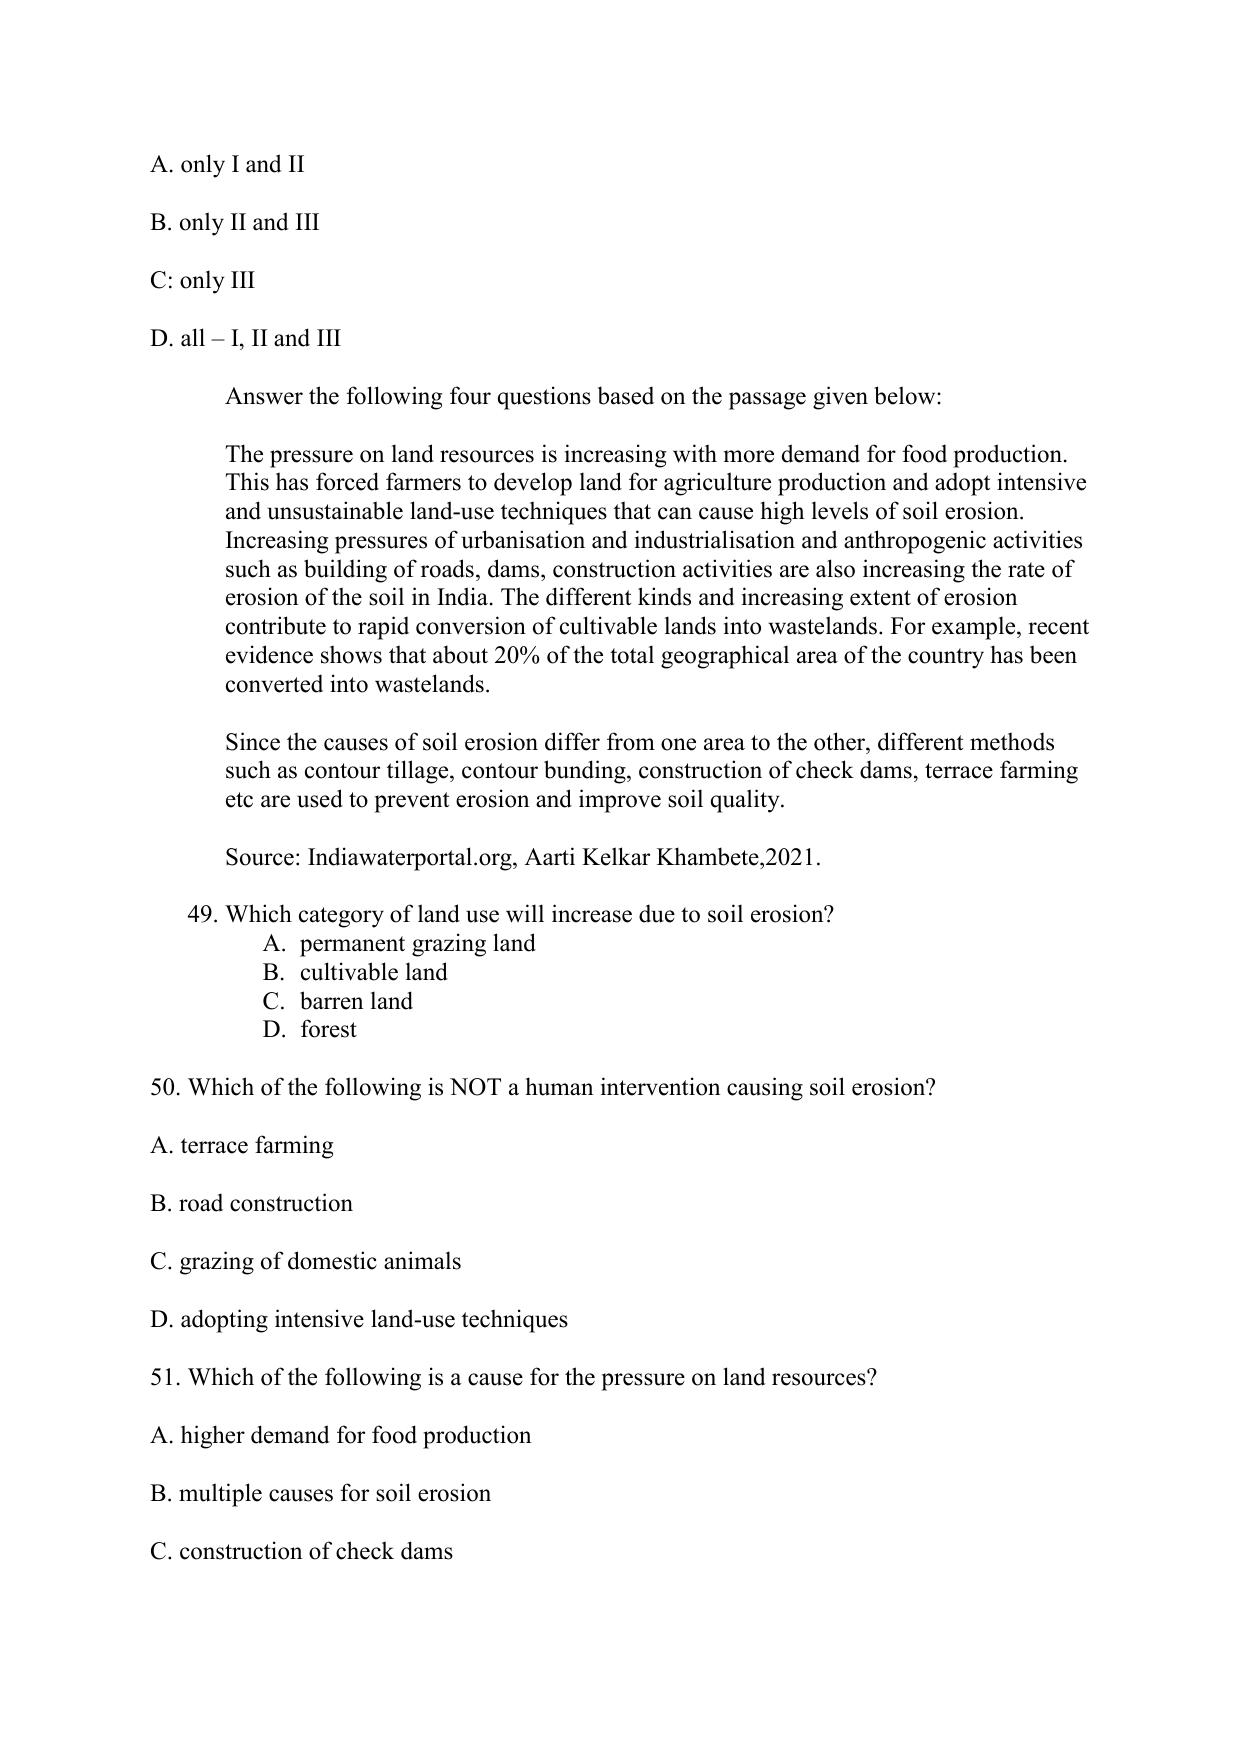 CBSE Class 12 Geography Term 1 Practice Questions 2021-22 - Page 17